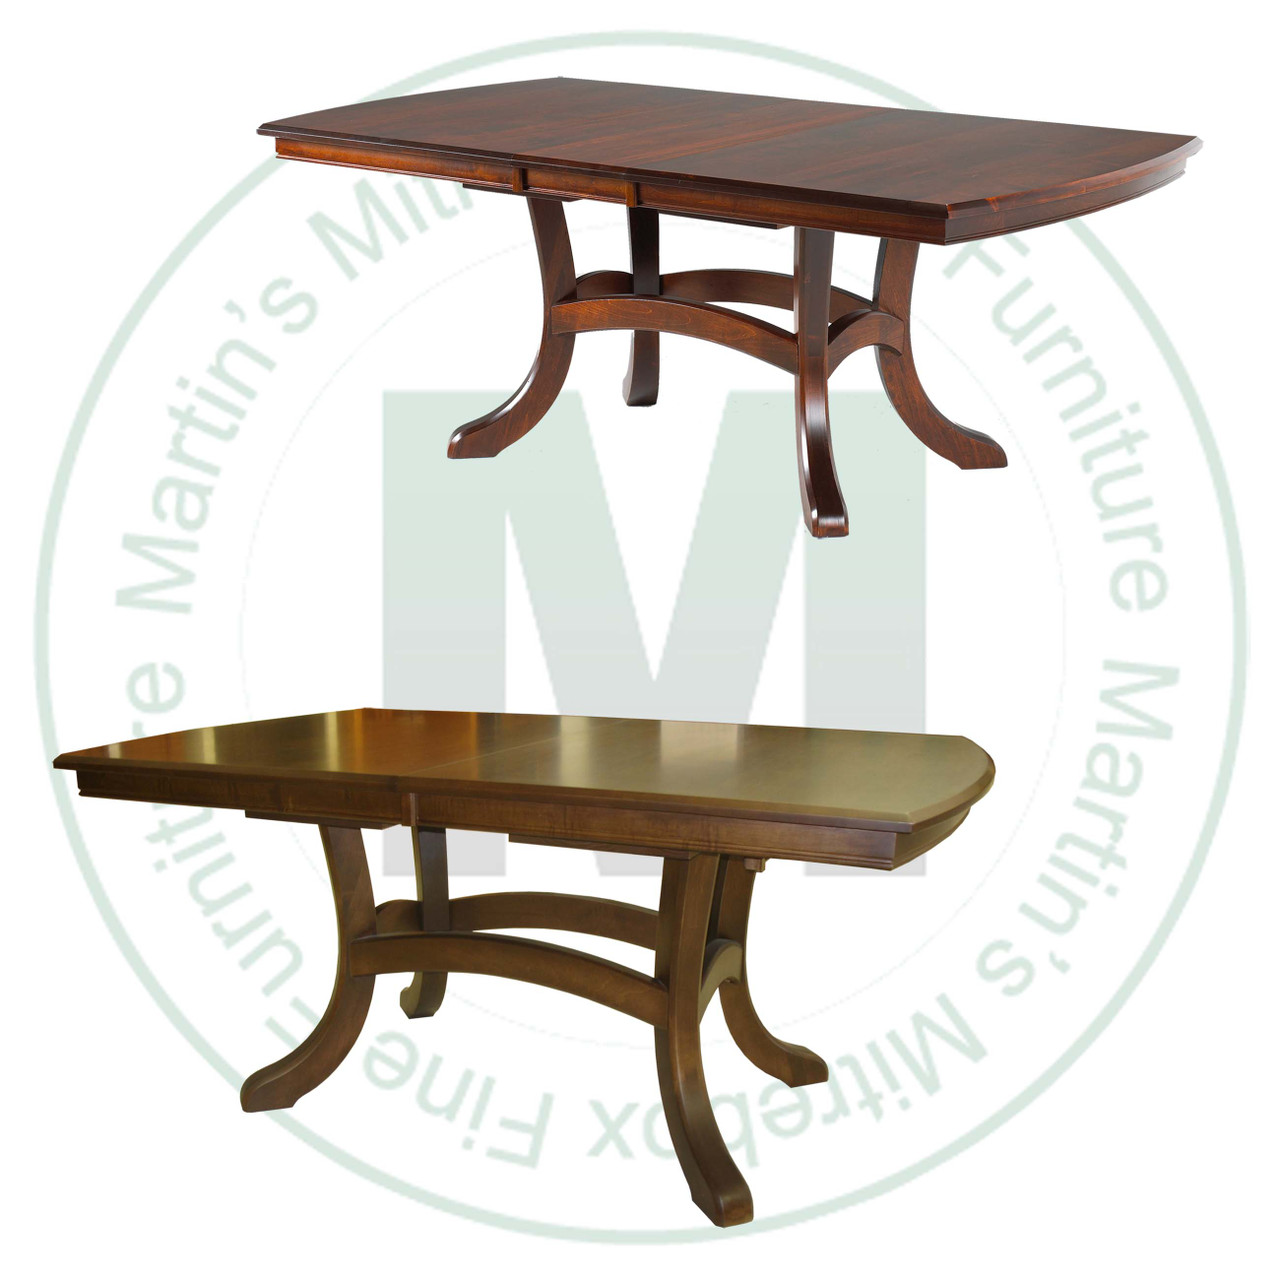 Oak Jordan Double Pedestal Table 48''D x 66''W x 30''H With 4 - 12'' Leaves. Table Has 1.25'' Thick Top